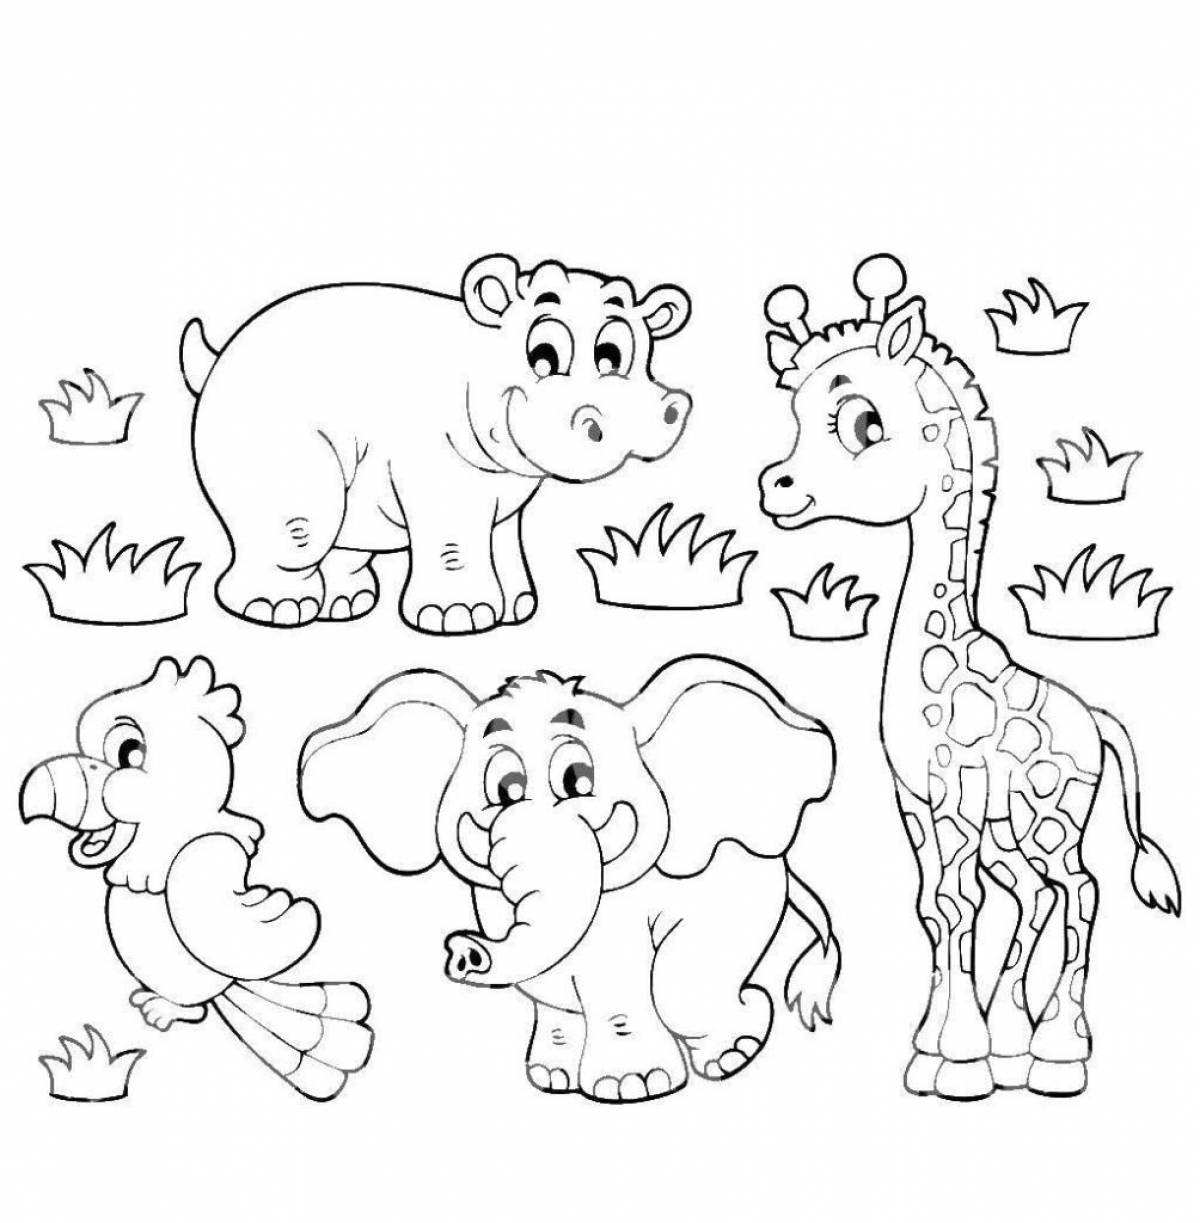 Gorgeous wild animal coloring page